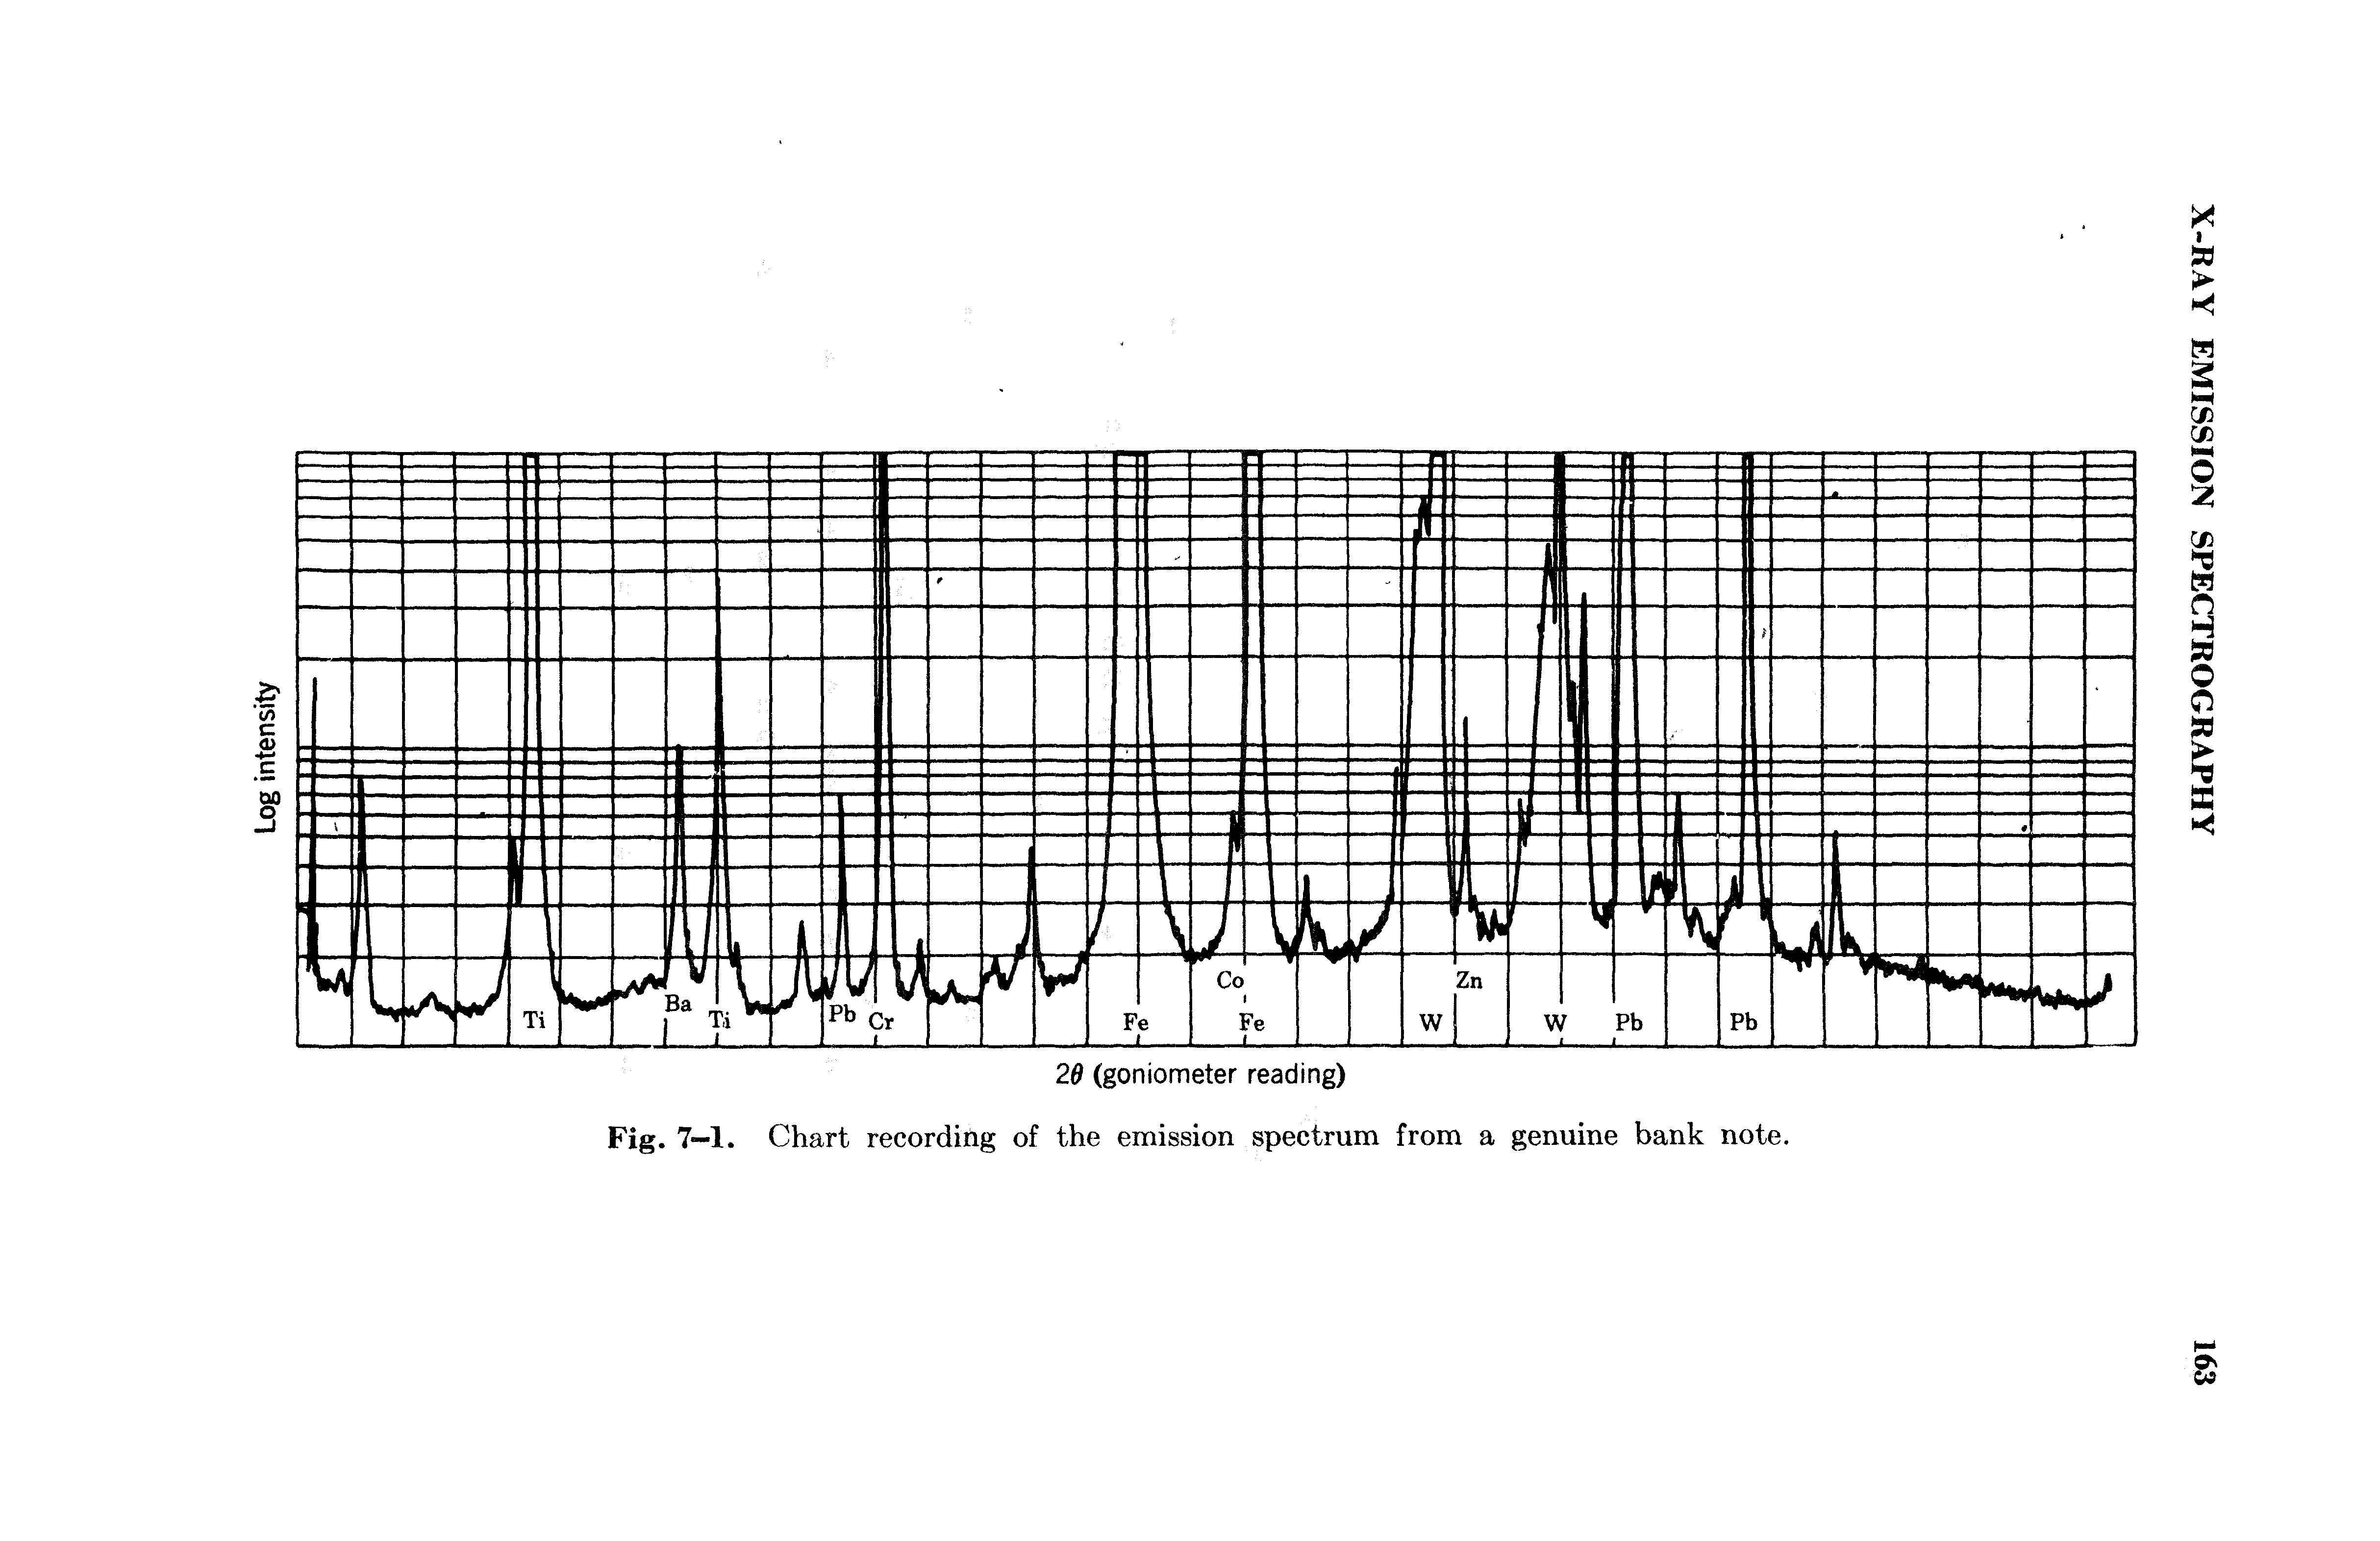 Fig. 7—1. Chart recording of the emission spectrum from a genuine bank note.